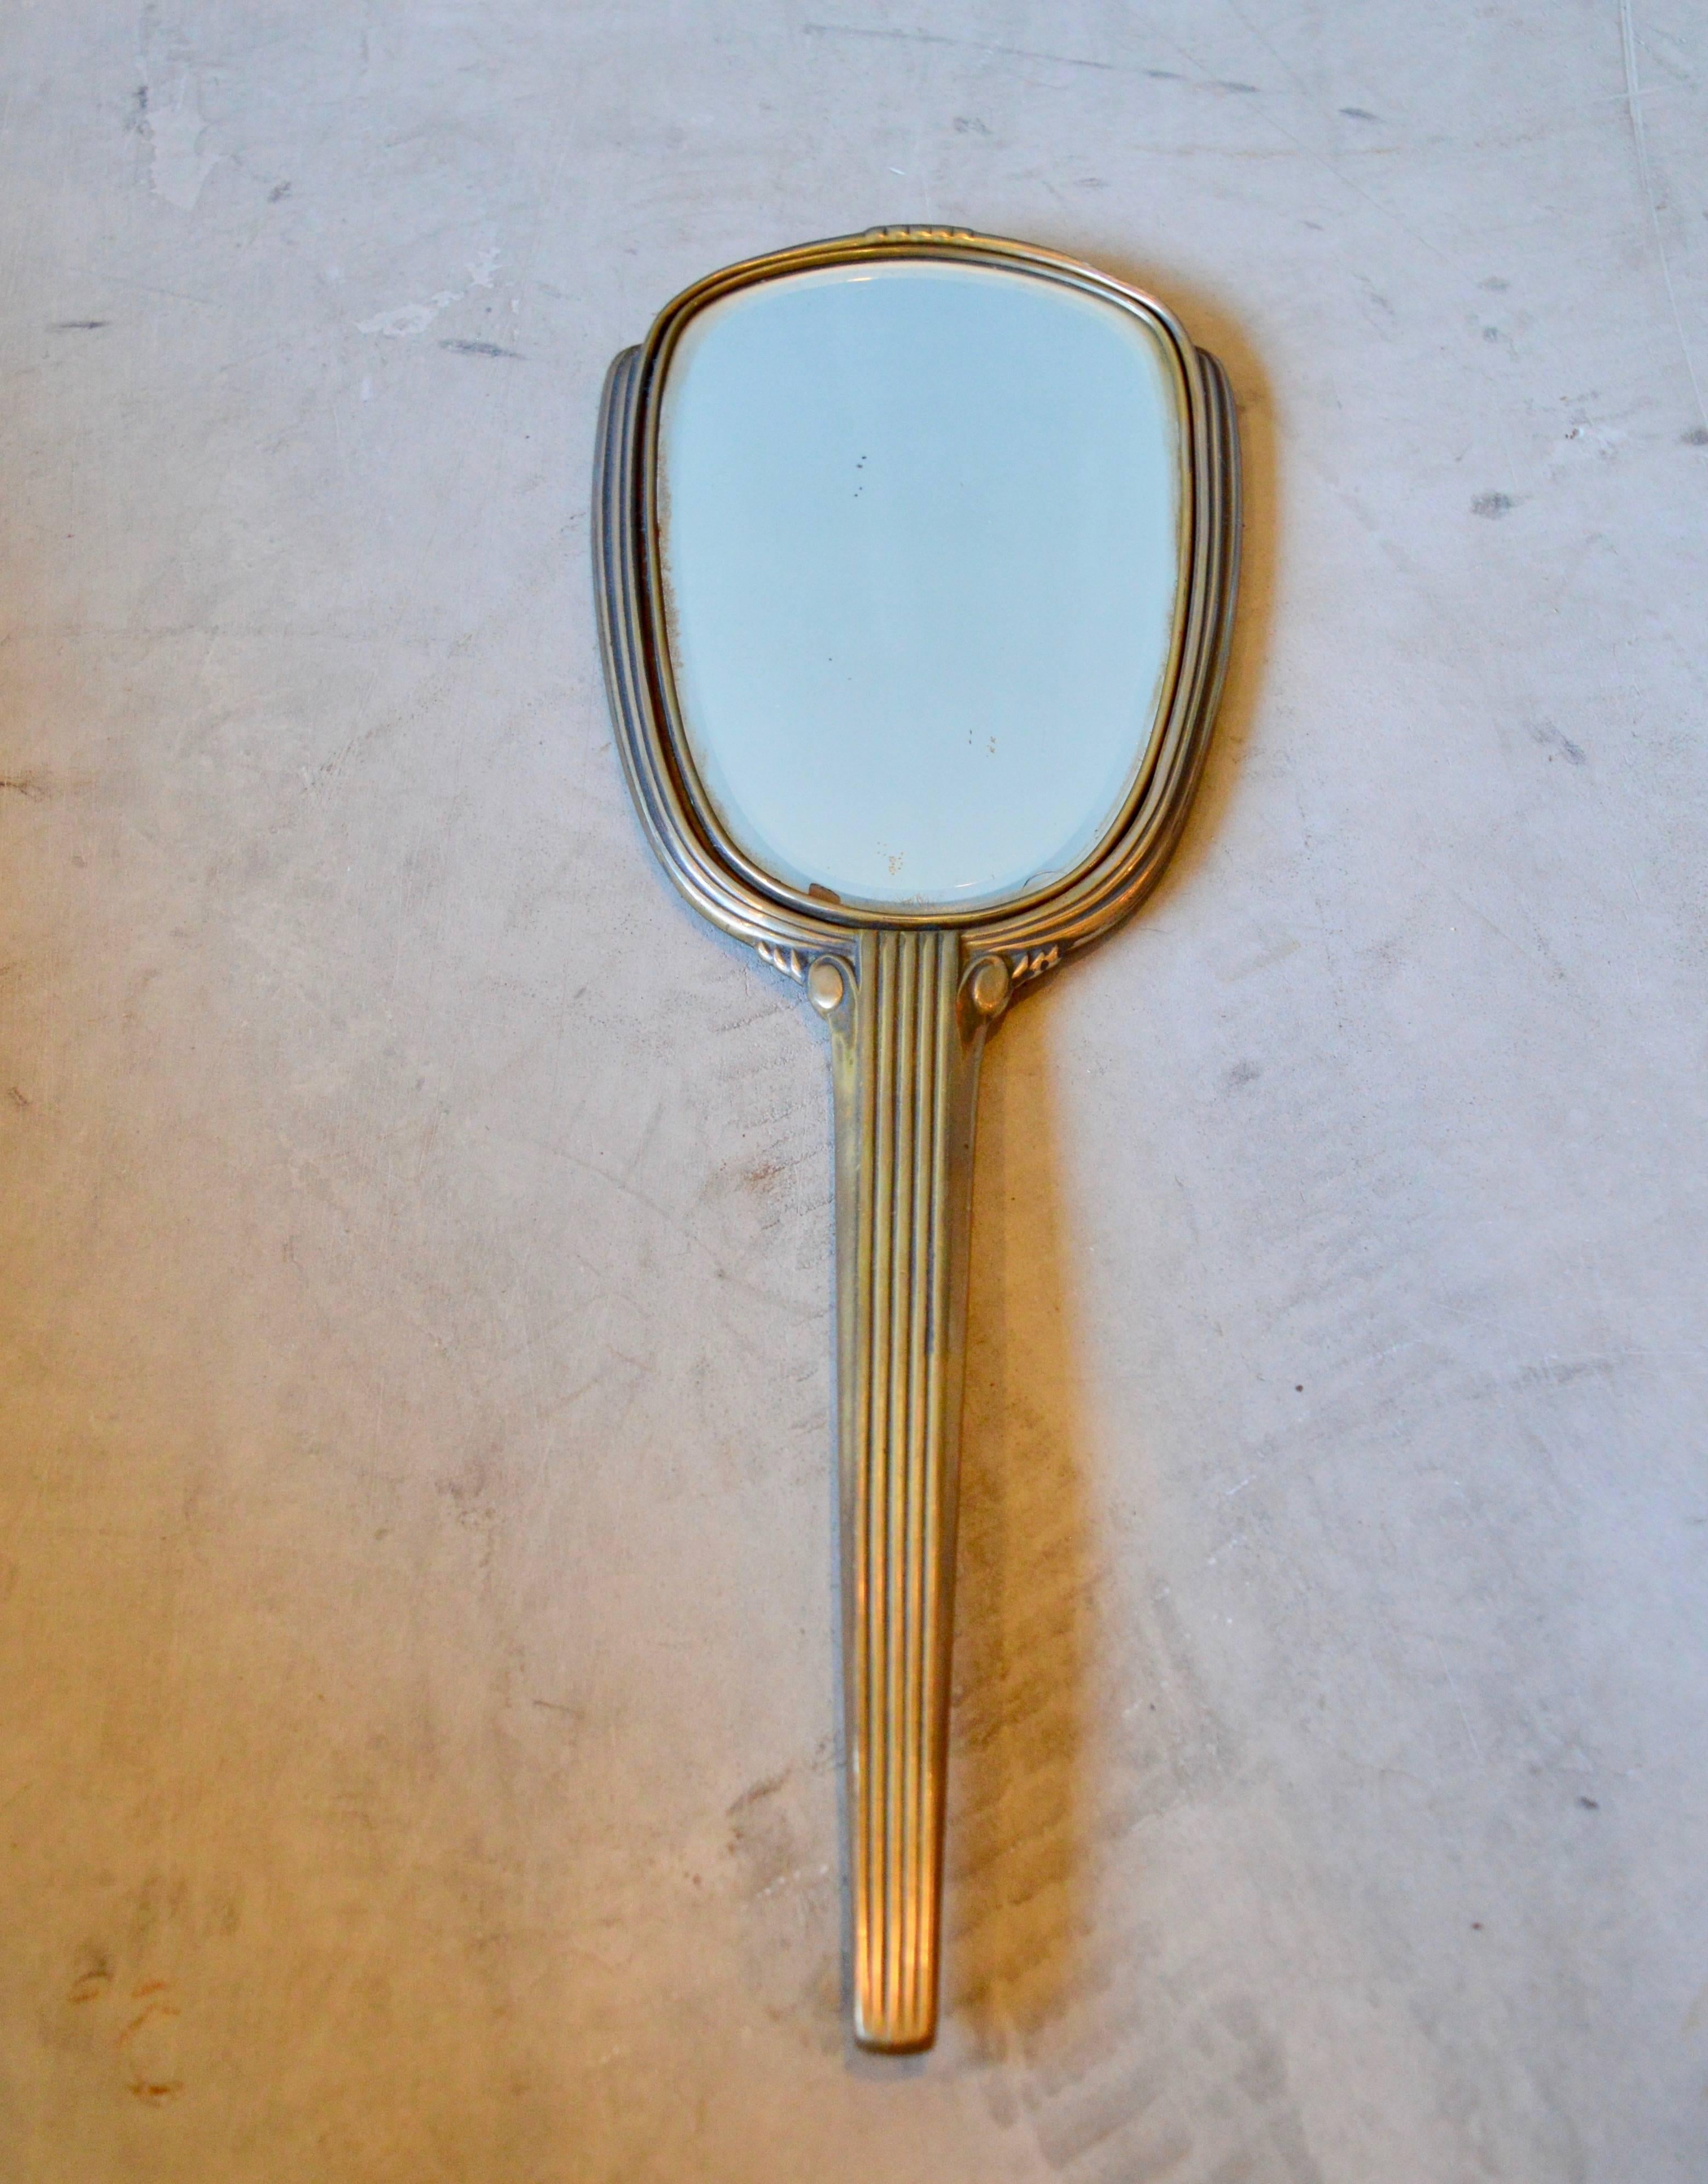 Beautiful Art Deco hand mirror. Brass with excellent patina. Very good vintage condition. Perfect addition to a vanity.